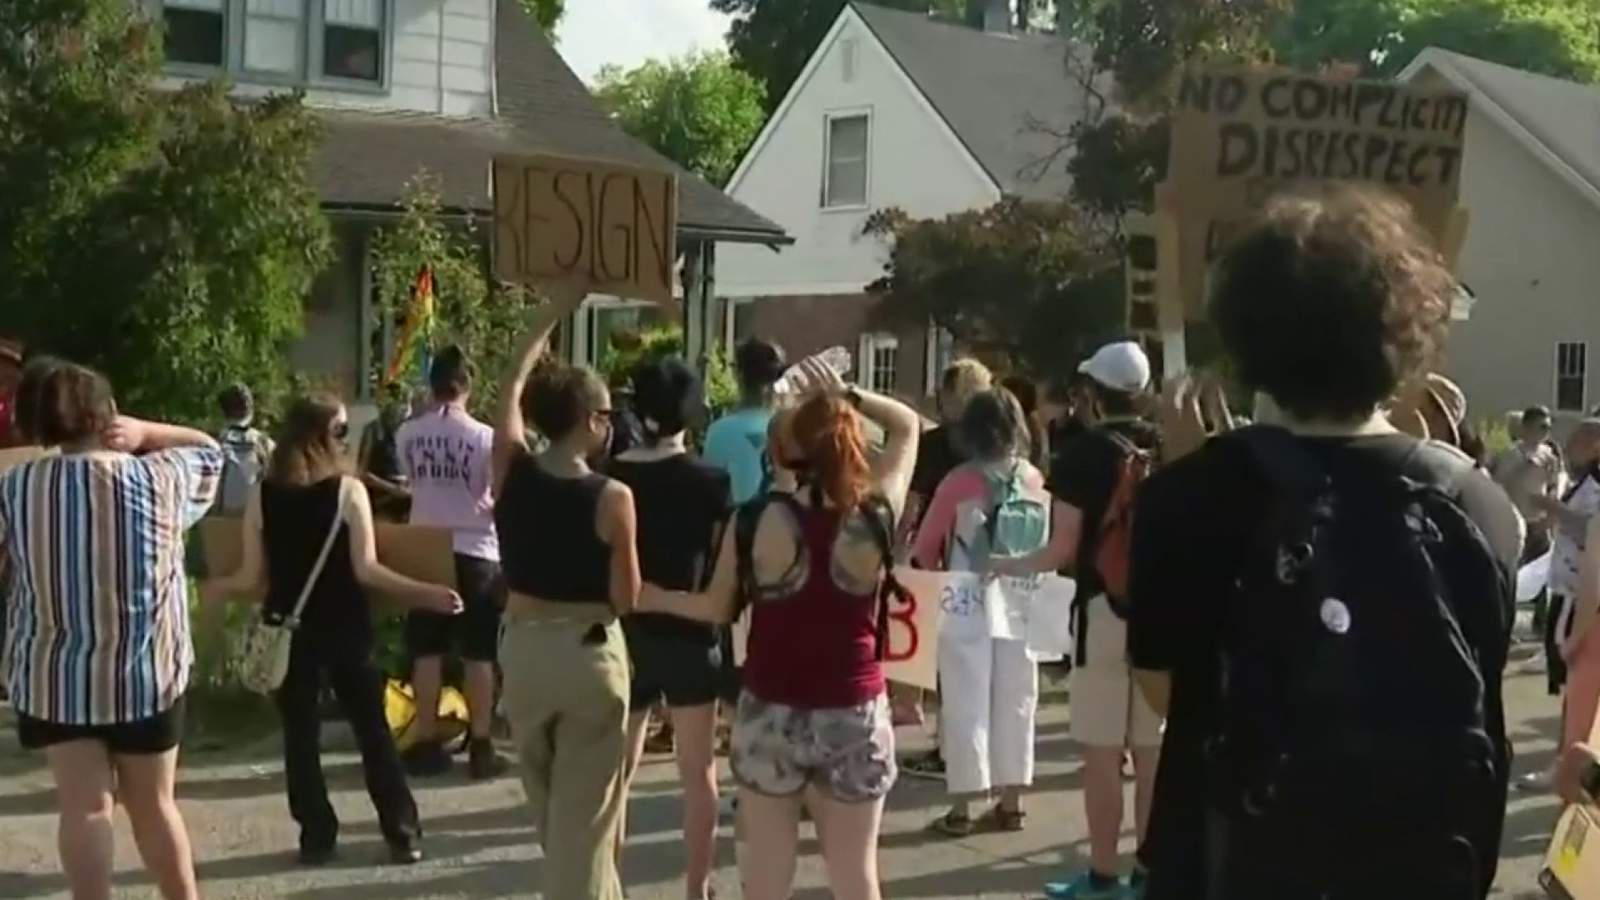 Protesters gather at Ypsilanti City Hall, mayors house following controversial comments